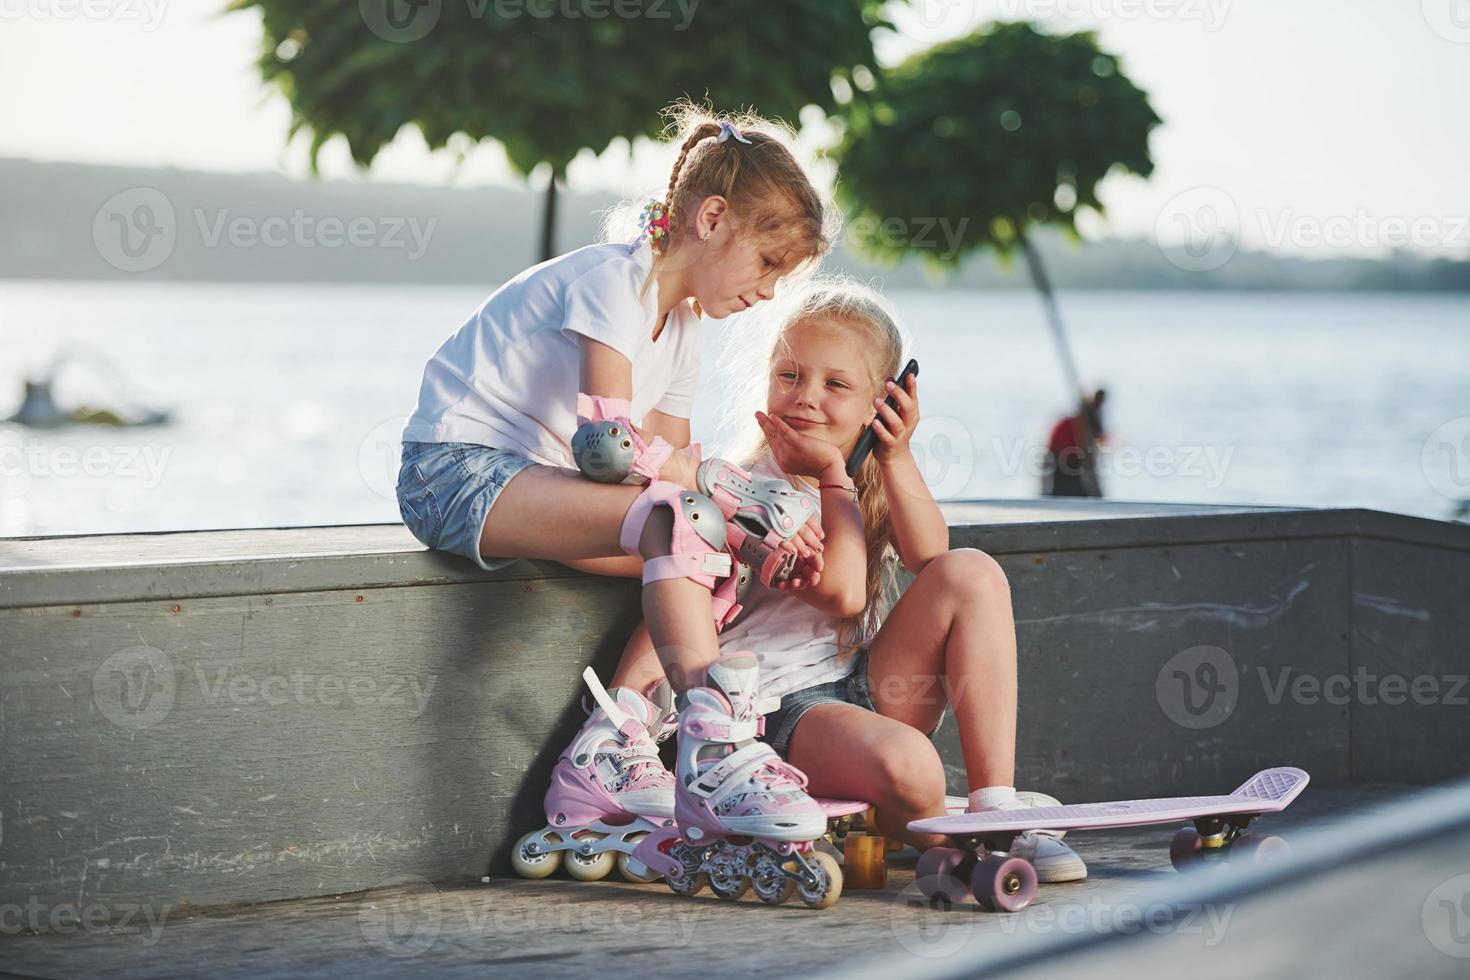 Talking with each other. On the ramp for extreme sports. Two little girls with roller skates outdoors have fun photo